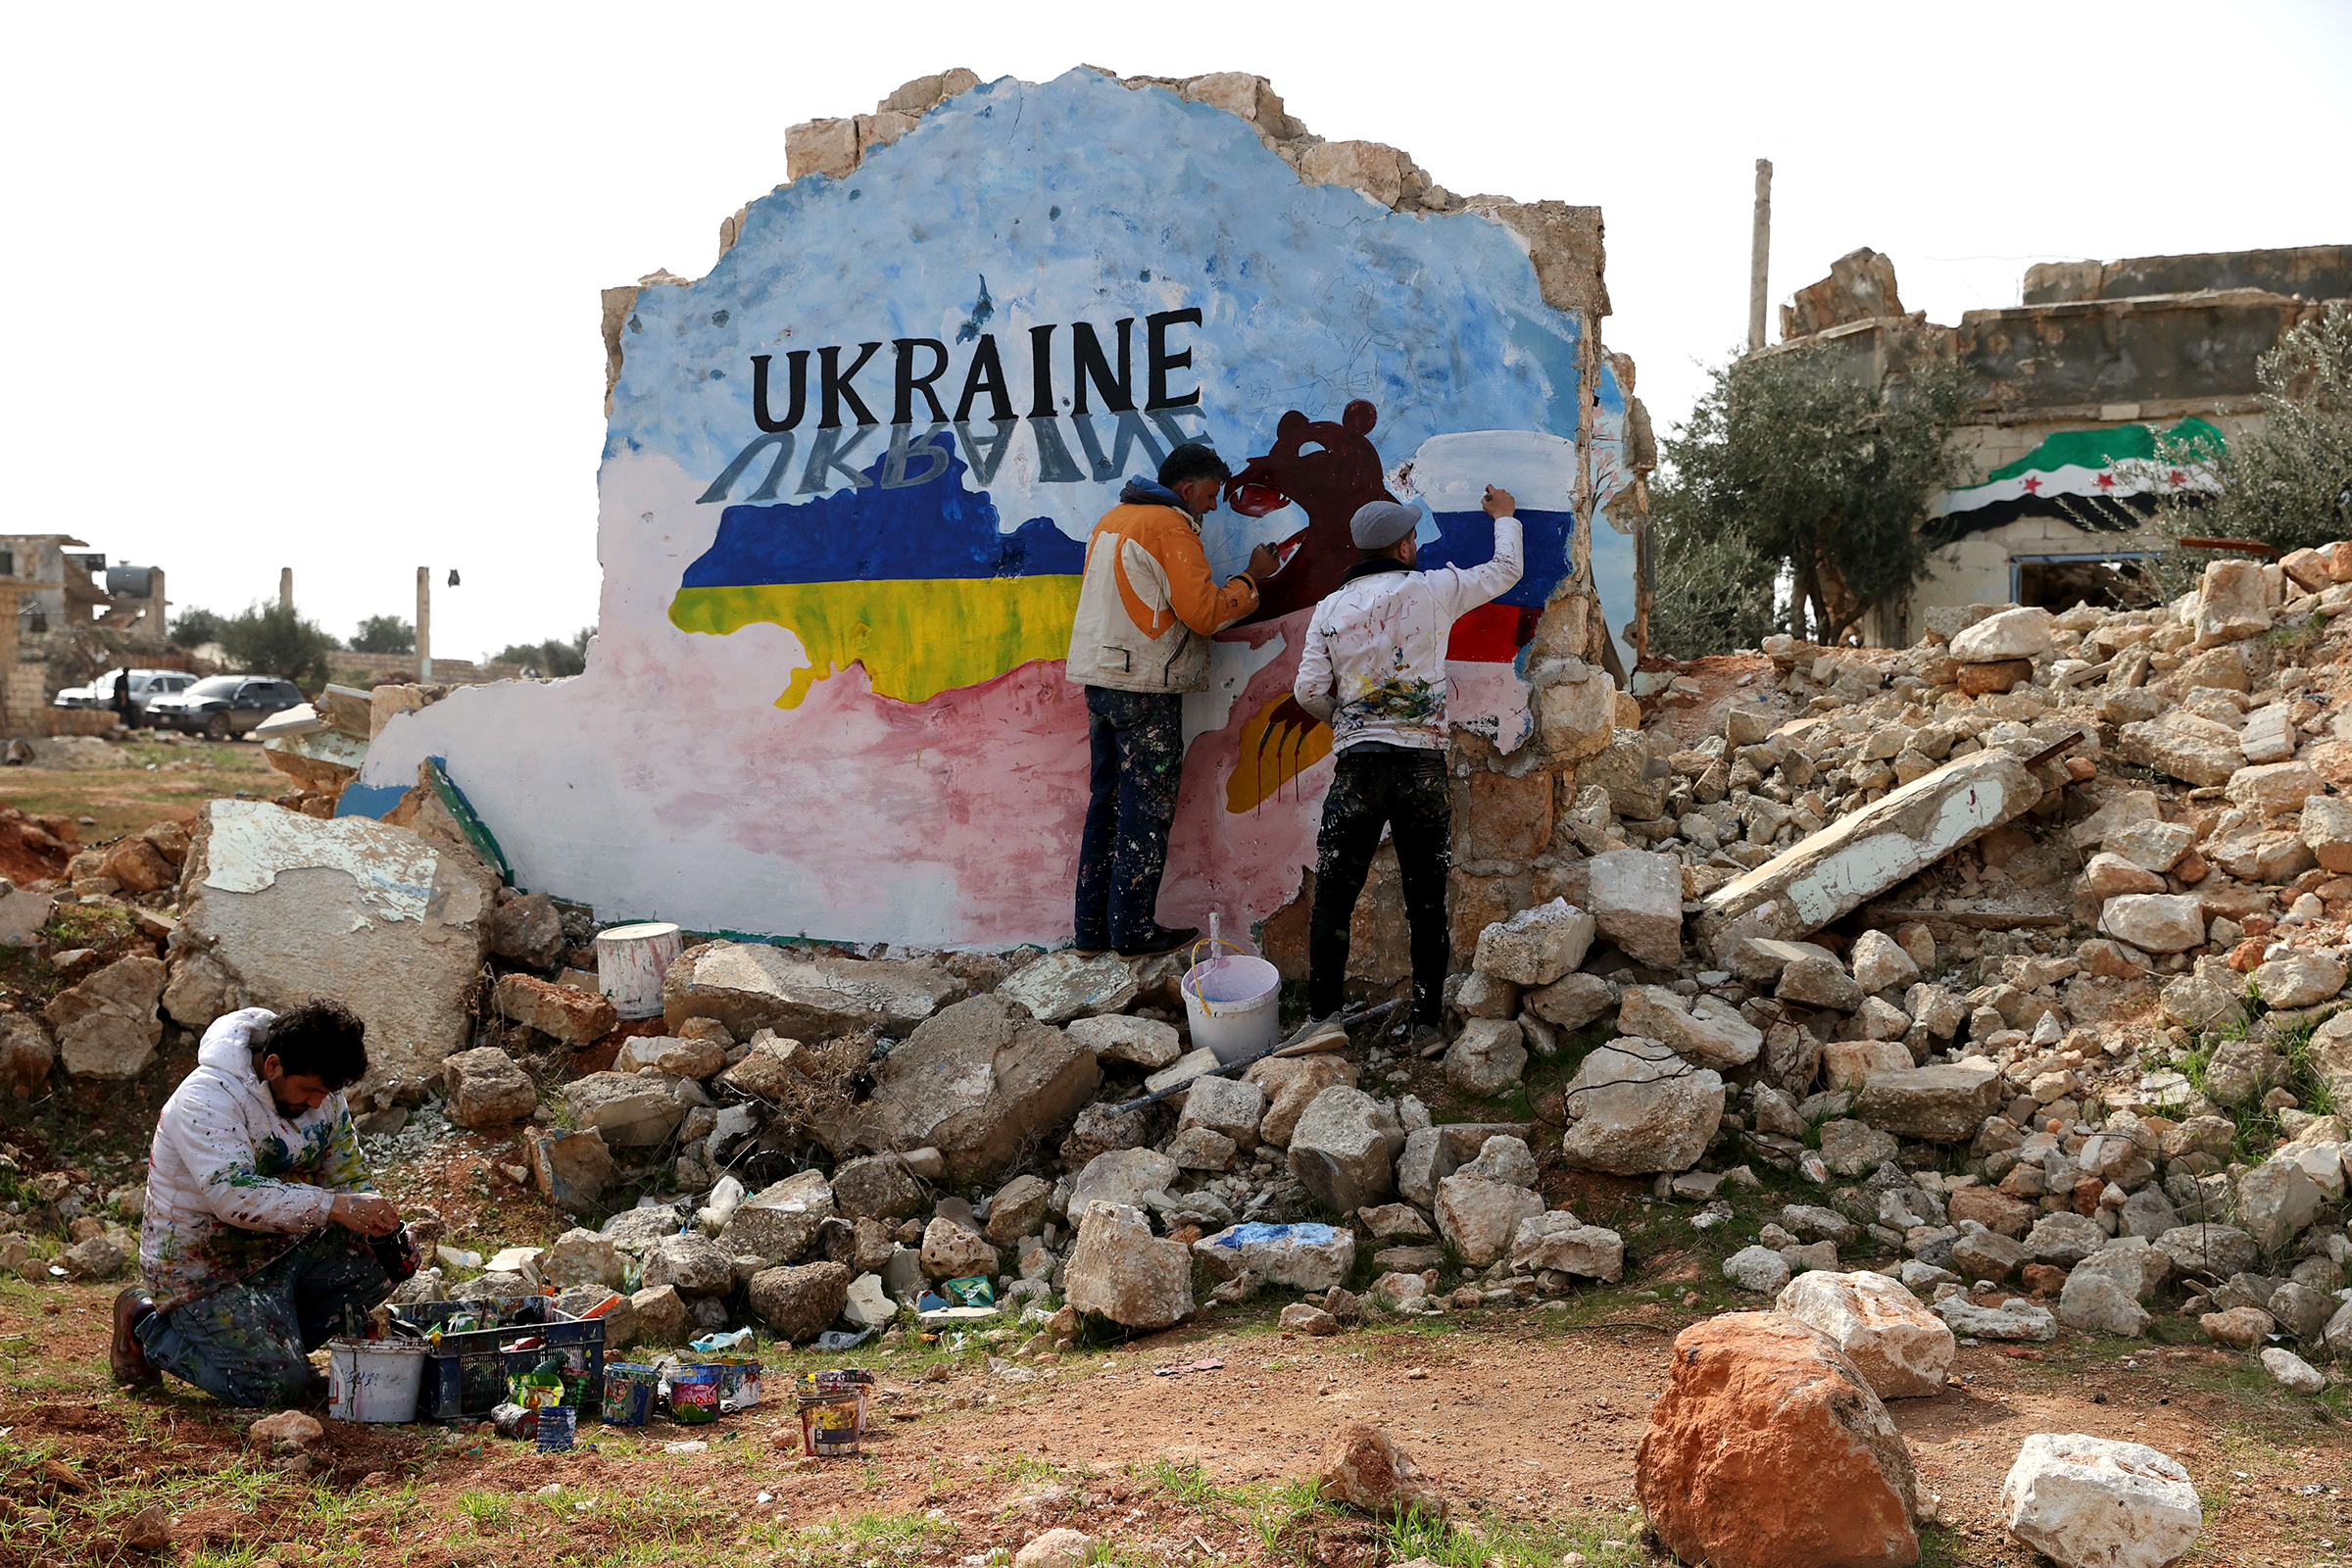 Syrian artists Aziz Asmar and Anis Hamdoun paint a mural amid the destruction, depicting the colours of the Russian and Ukrainian flags, to protest against Russia's military operation in Ukraine, in the rebel-held town of Binnish in Syria's northwestern Idlib province on February 24, 2022. (Omar Haj Kadour—AFP/Getty Images)